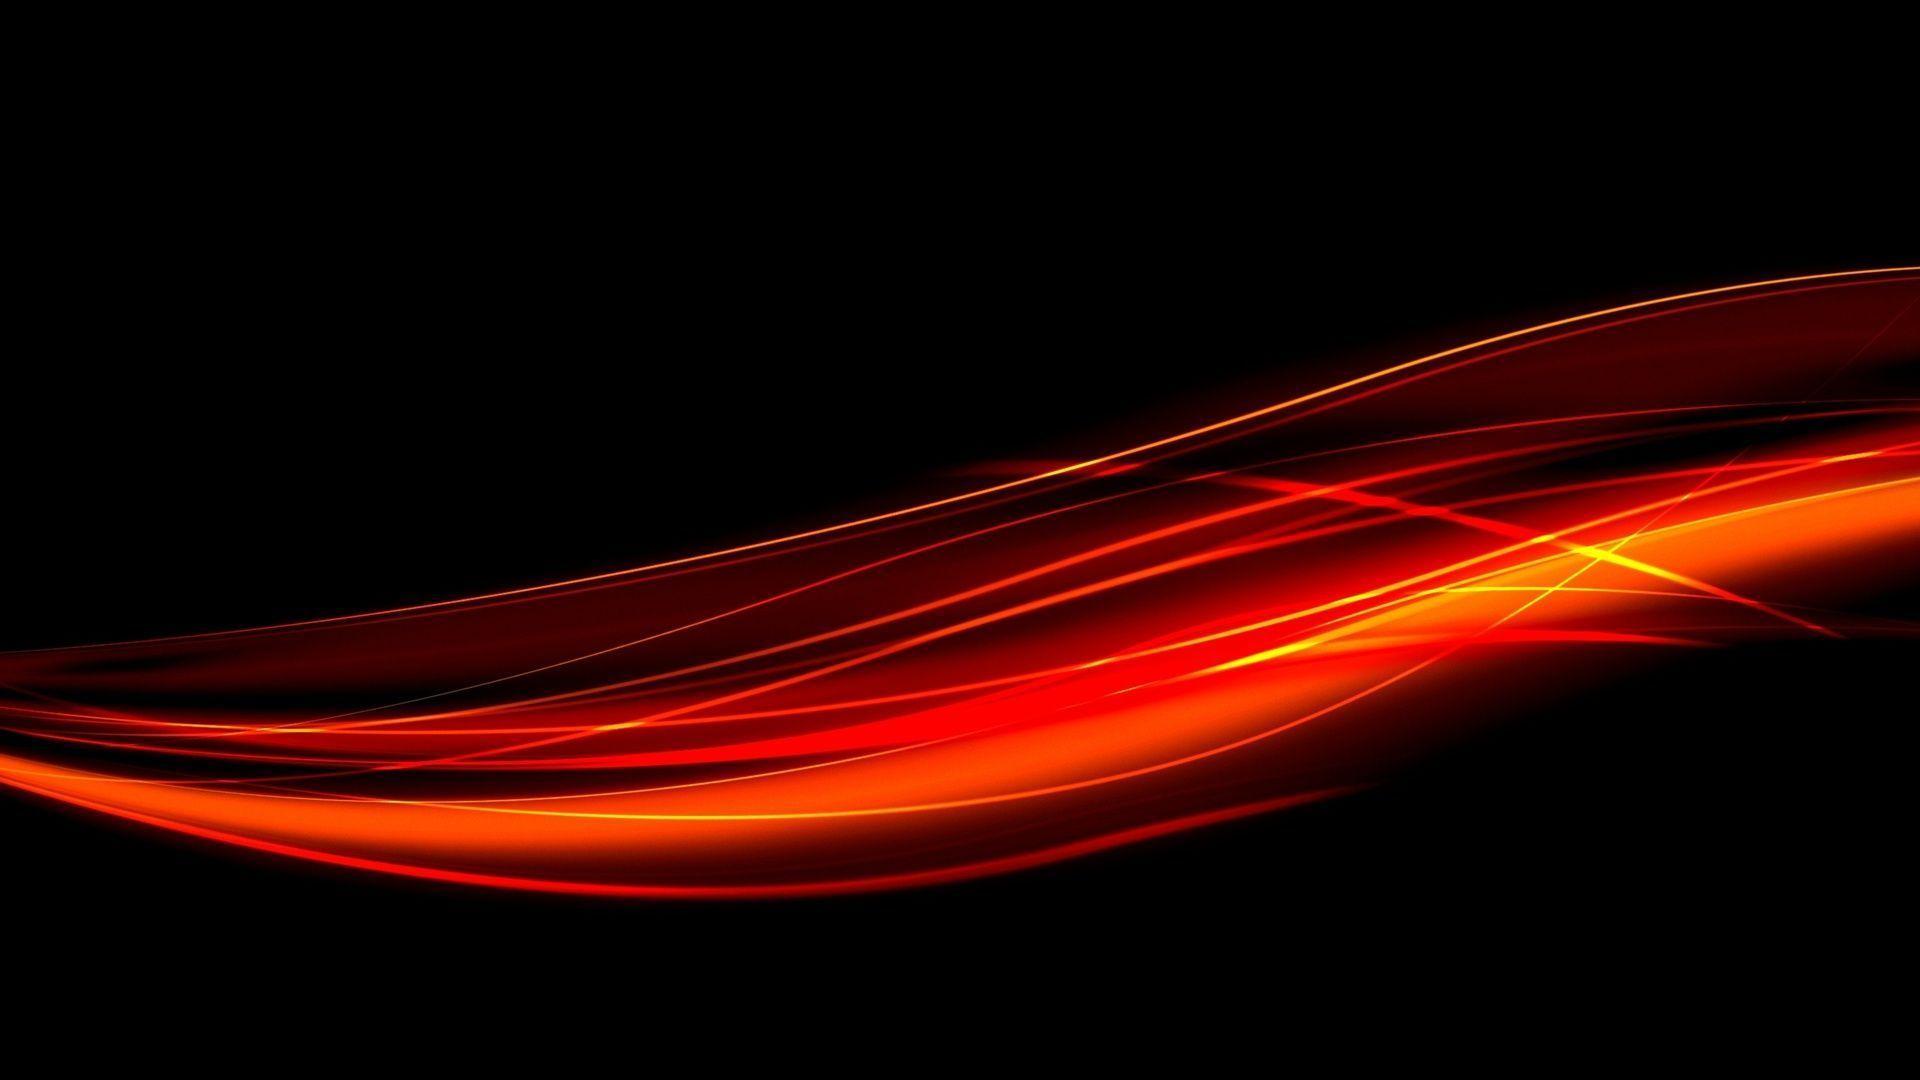 Black And Red Abstract Background Widescreen 2 HD Wallpaper